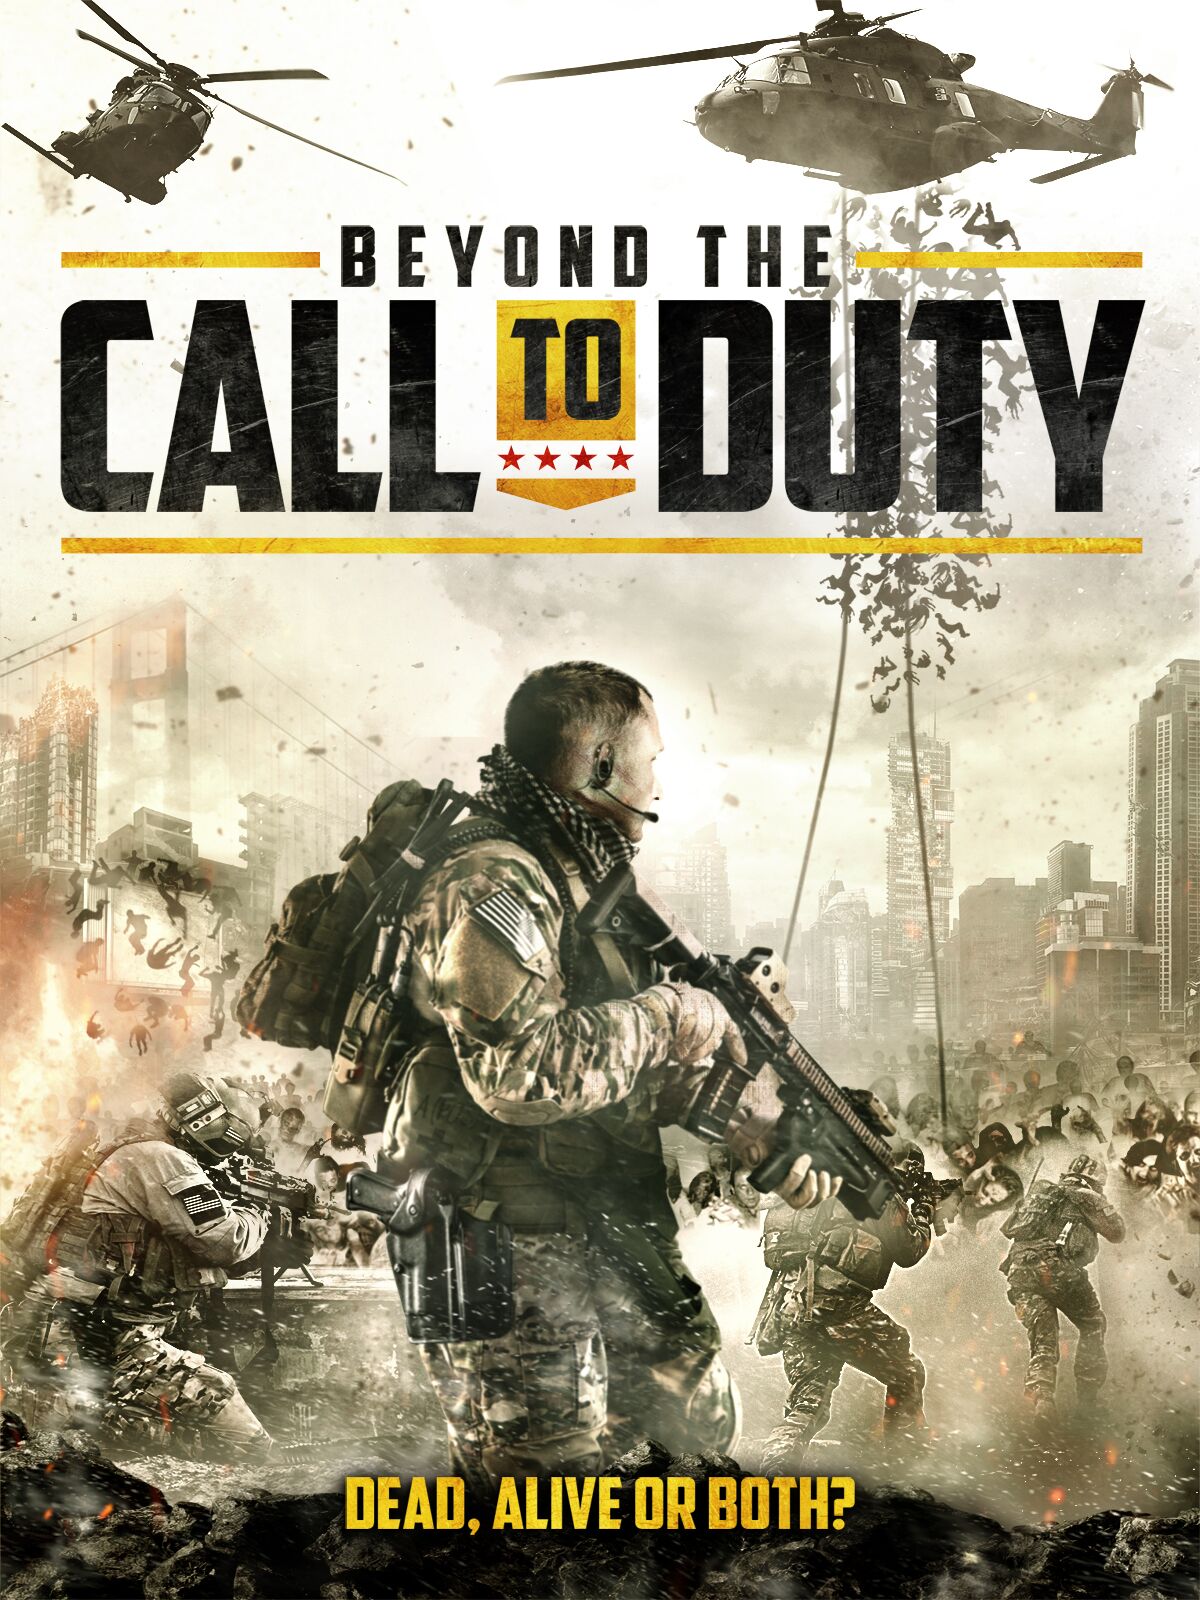 Beyond the Call to Duty (2016) starring Kevin Tanski on DVD on DVD